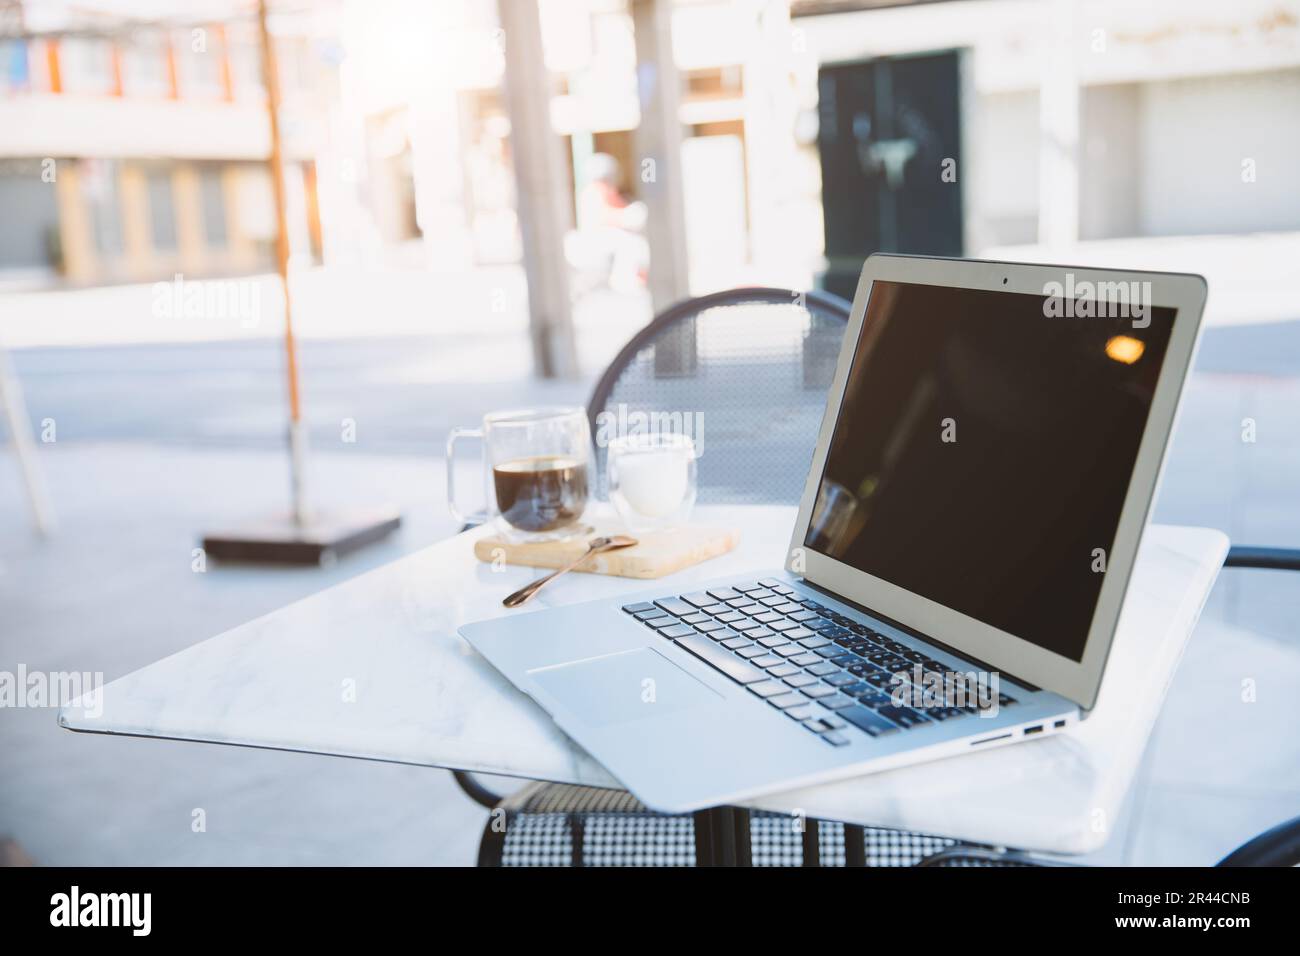 laptop computer at cafe table outdoor with cup of coffee for chill working officeless flexible workplace Stock Photo